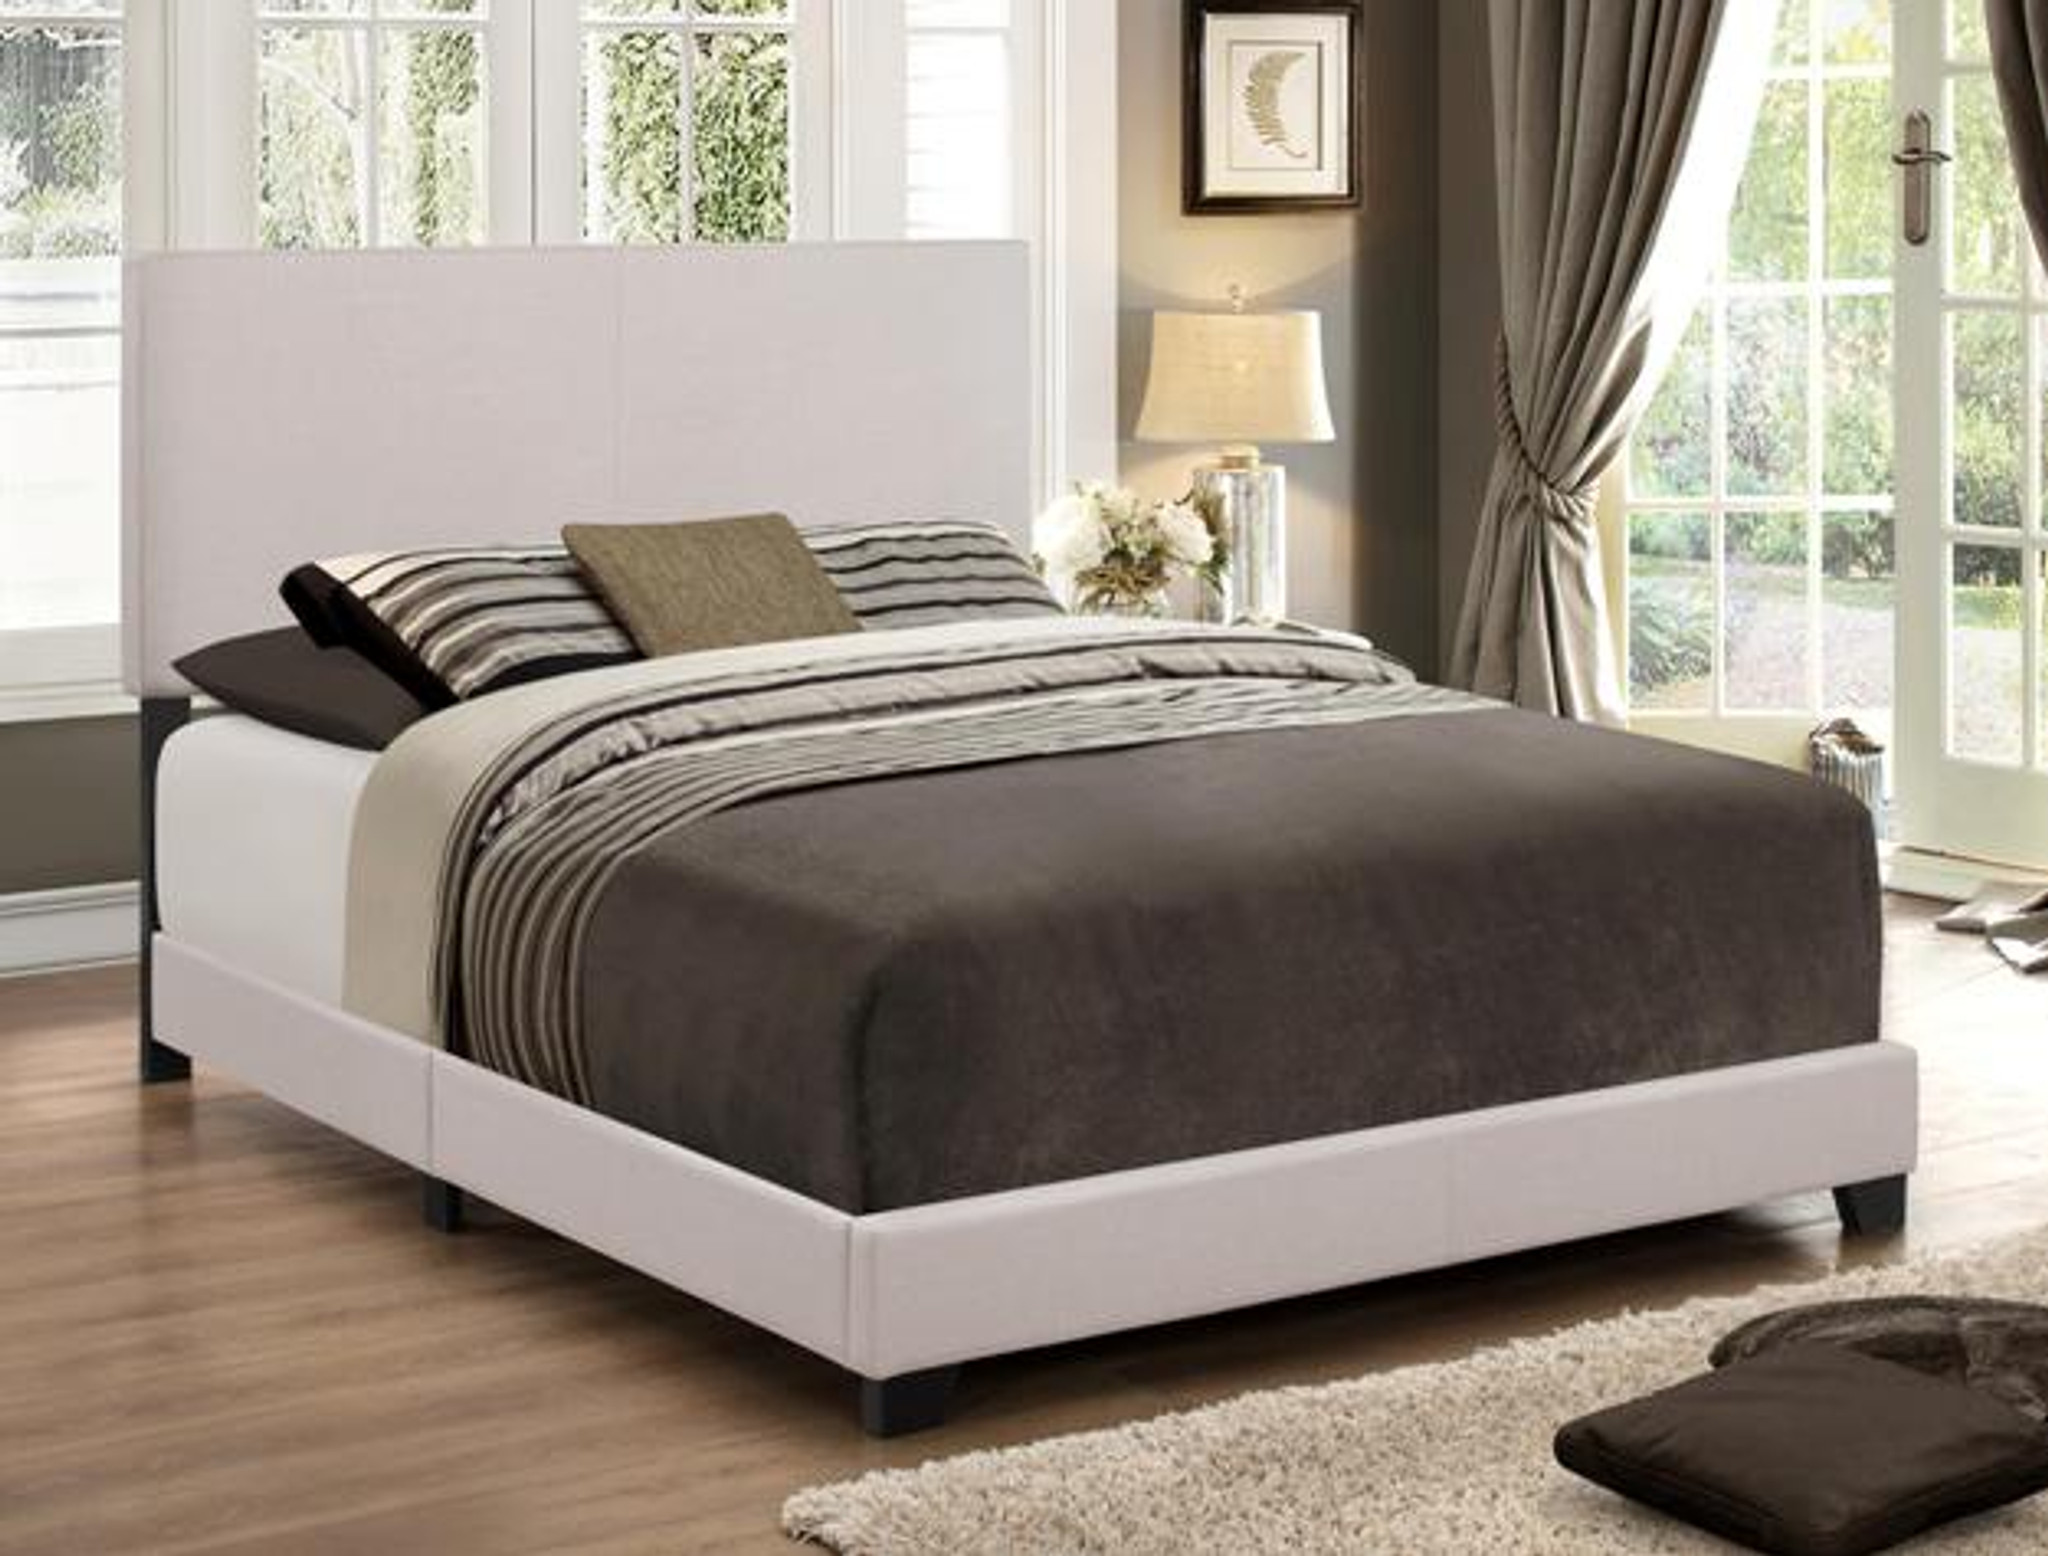 queen size bed dimensions cm